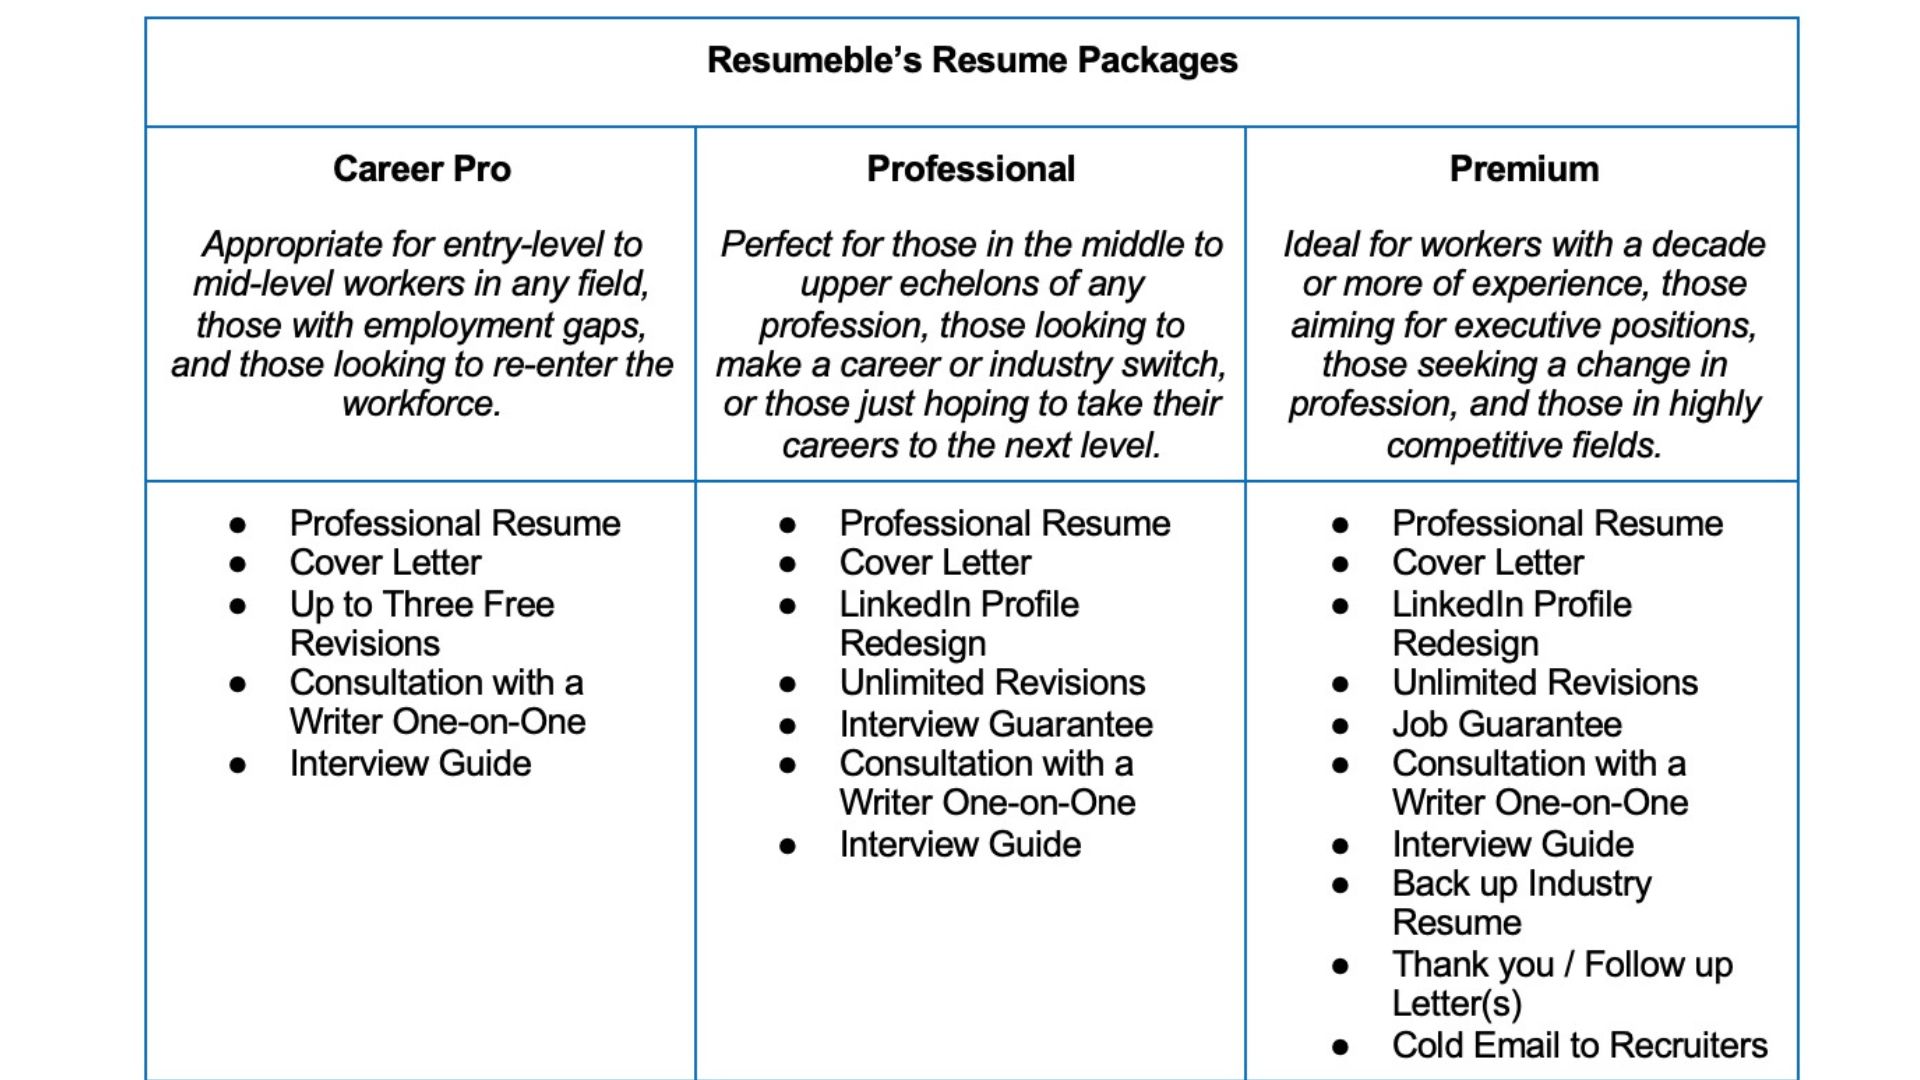 Resume and job application services